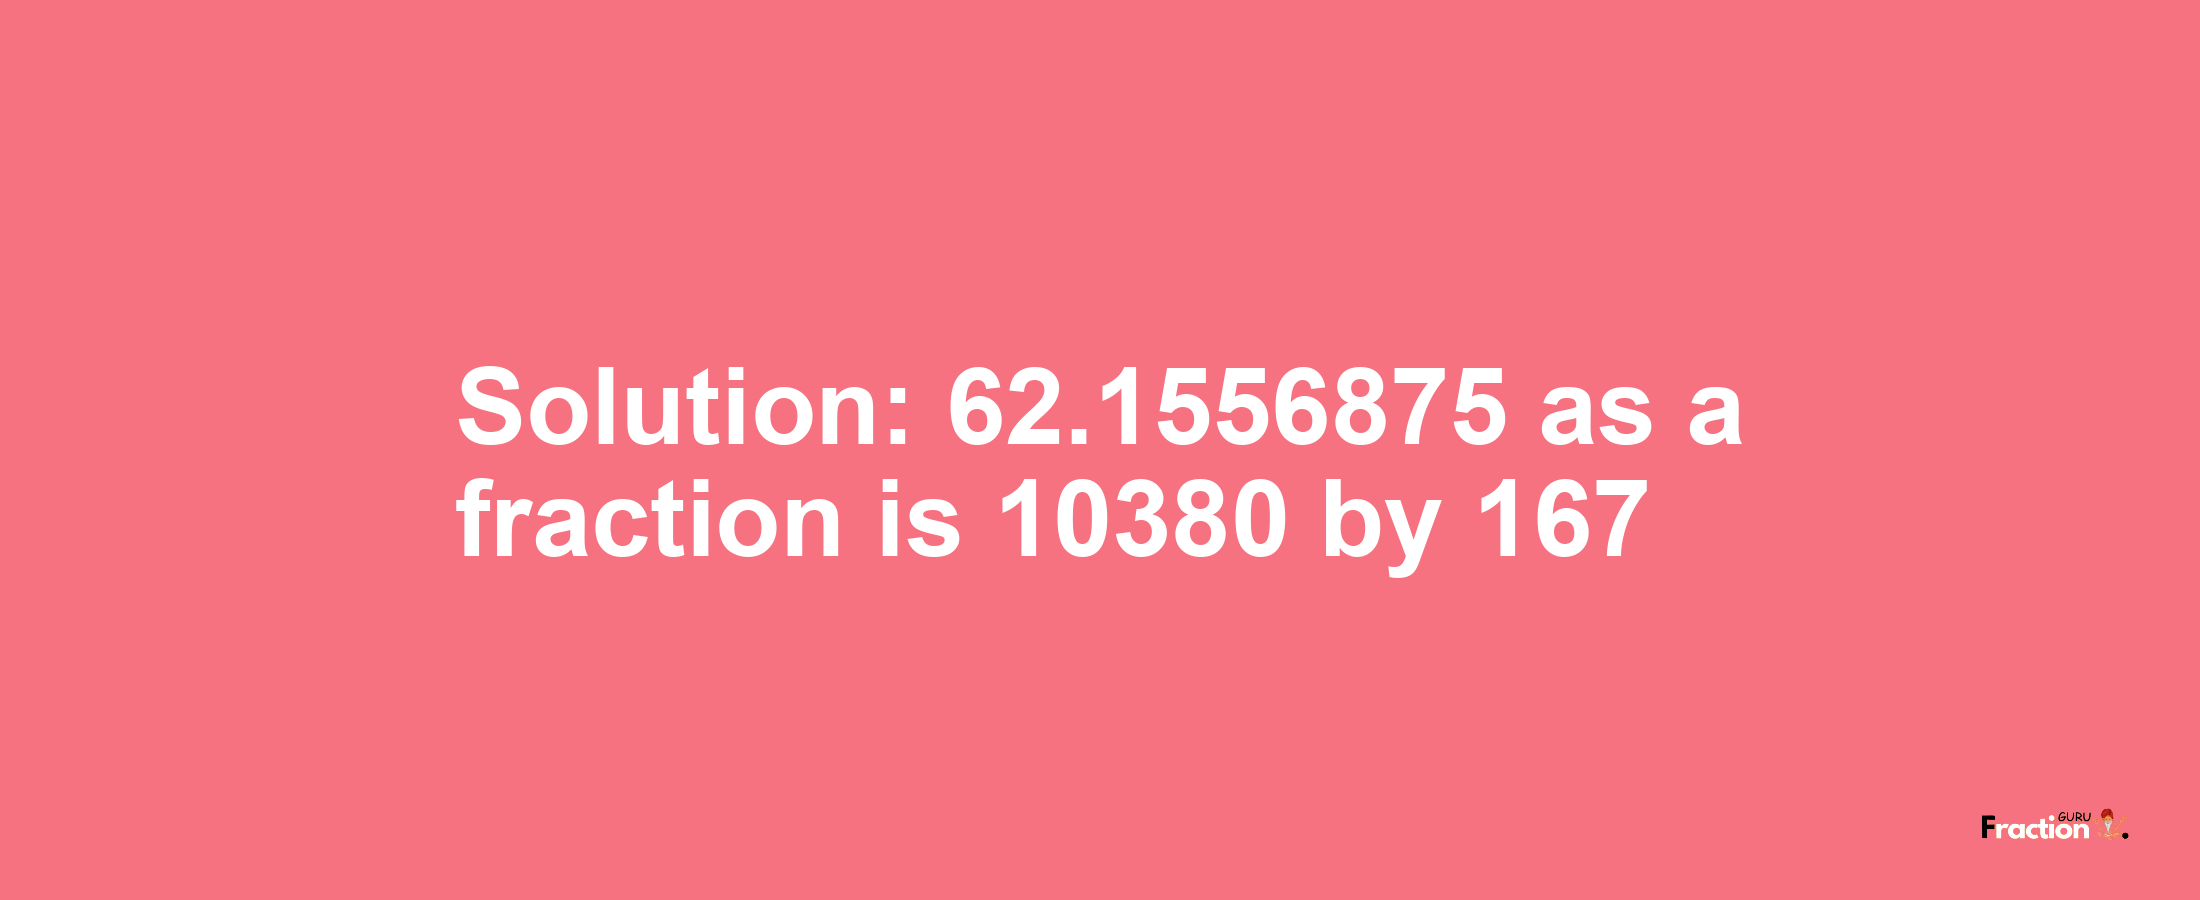 Solution:62.1556875 as a fraction is 10380/167